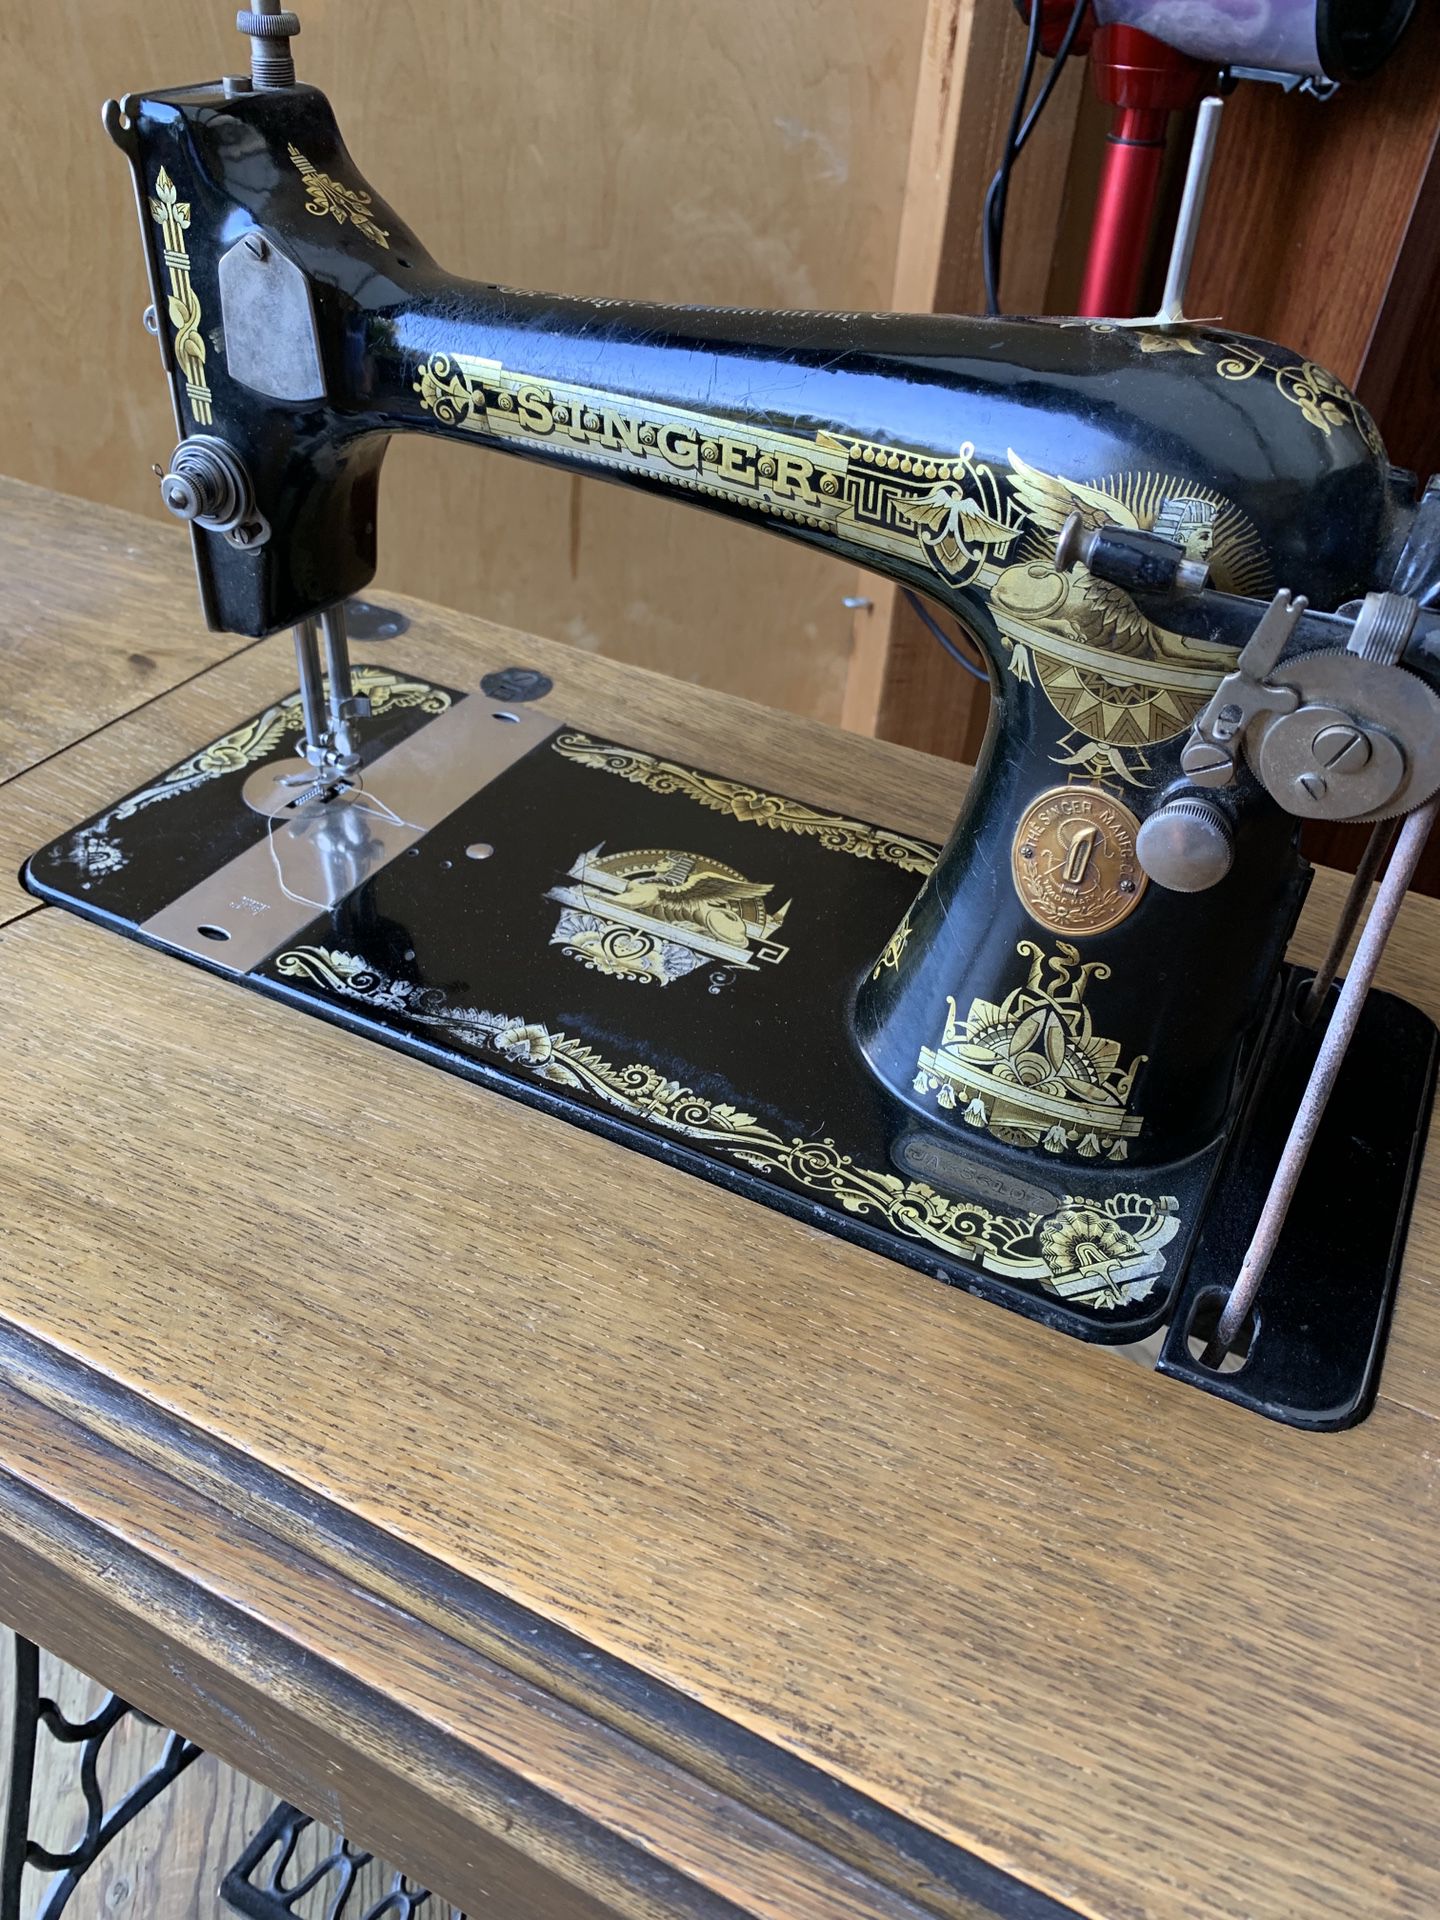 Antique Singer sewing machine and table